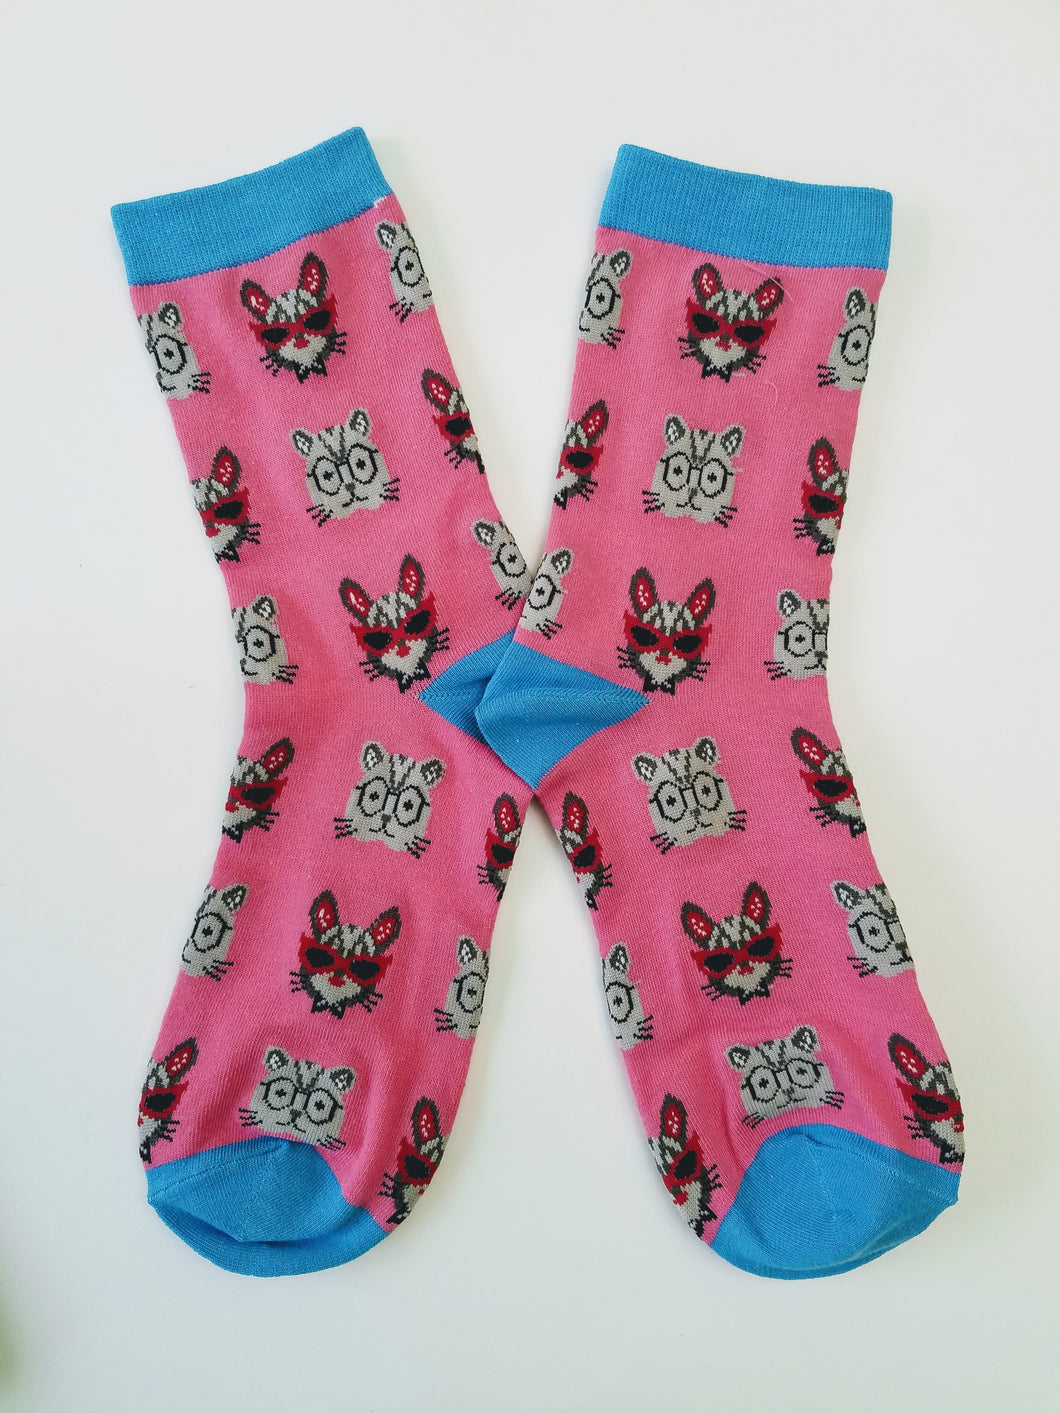 Cats with Glasses Crew Socks